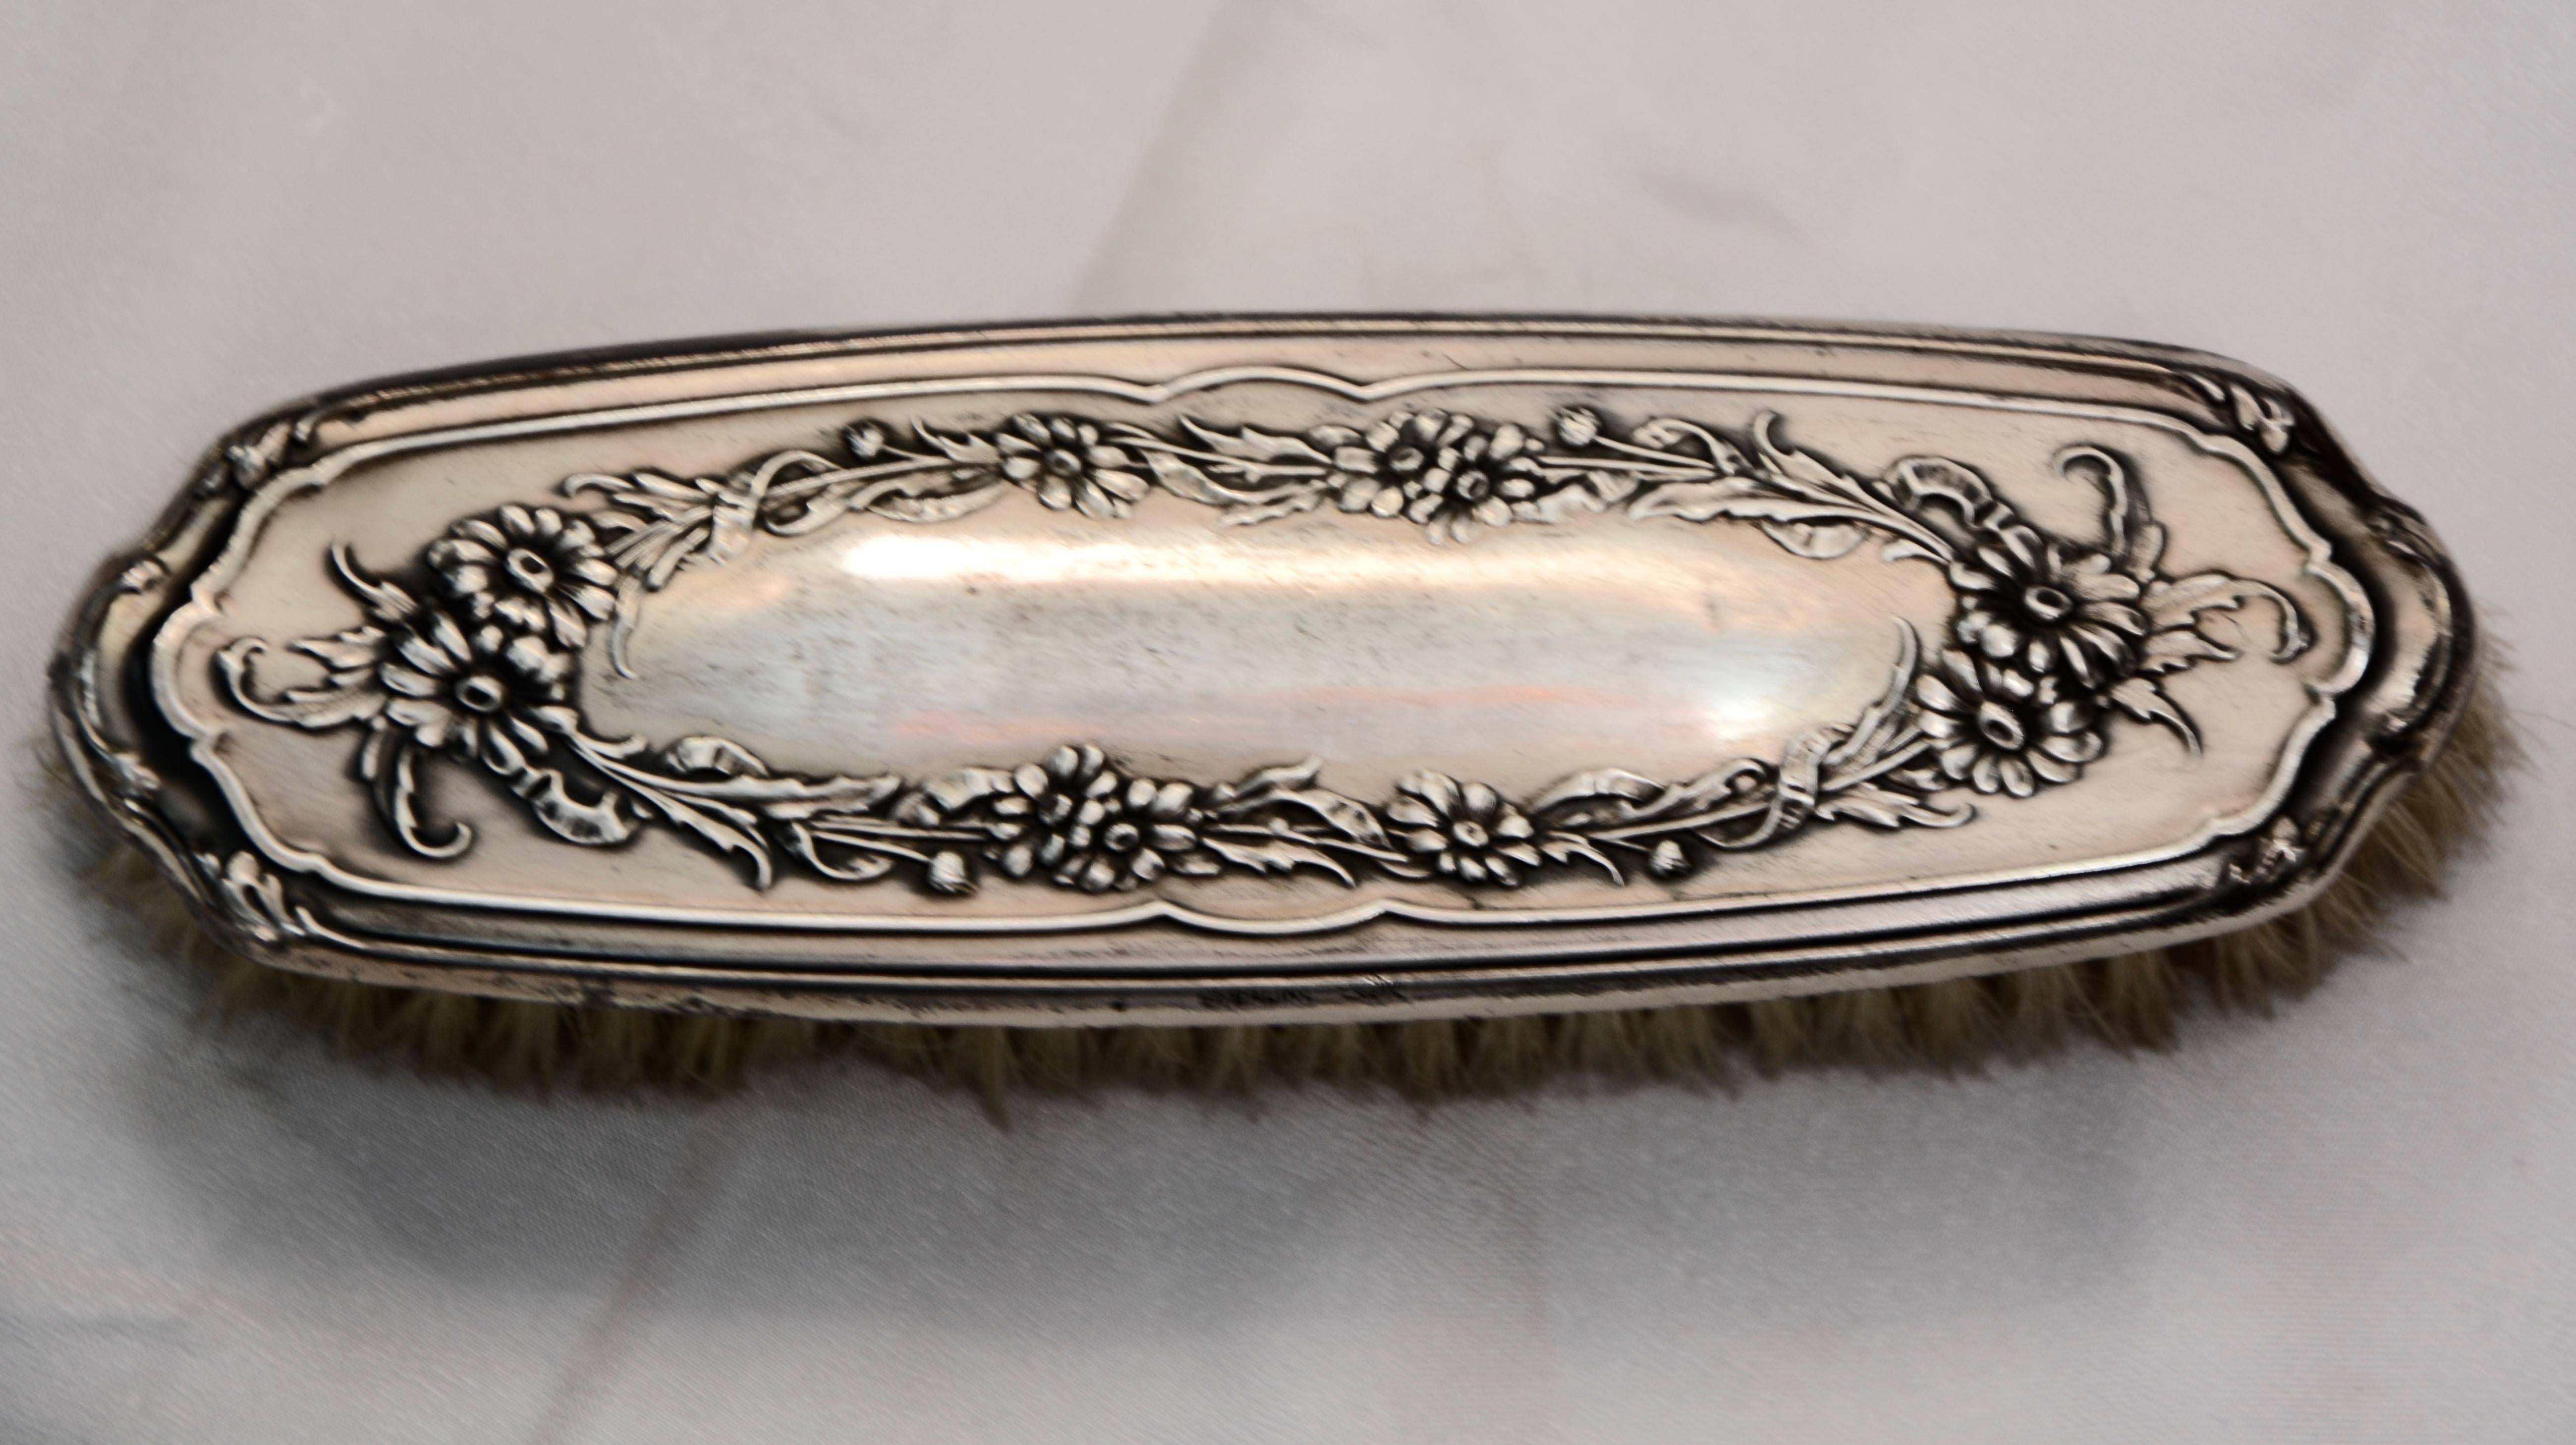 A lovely garland of flowers surrounded by a swirled border decorate the sterling silver of this Victorian clothes brush. It is marked on the side. Natural bristles will gently brush your clothing.